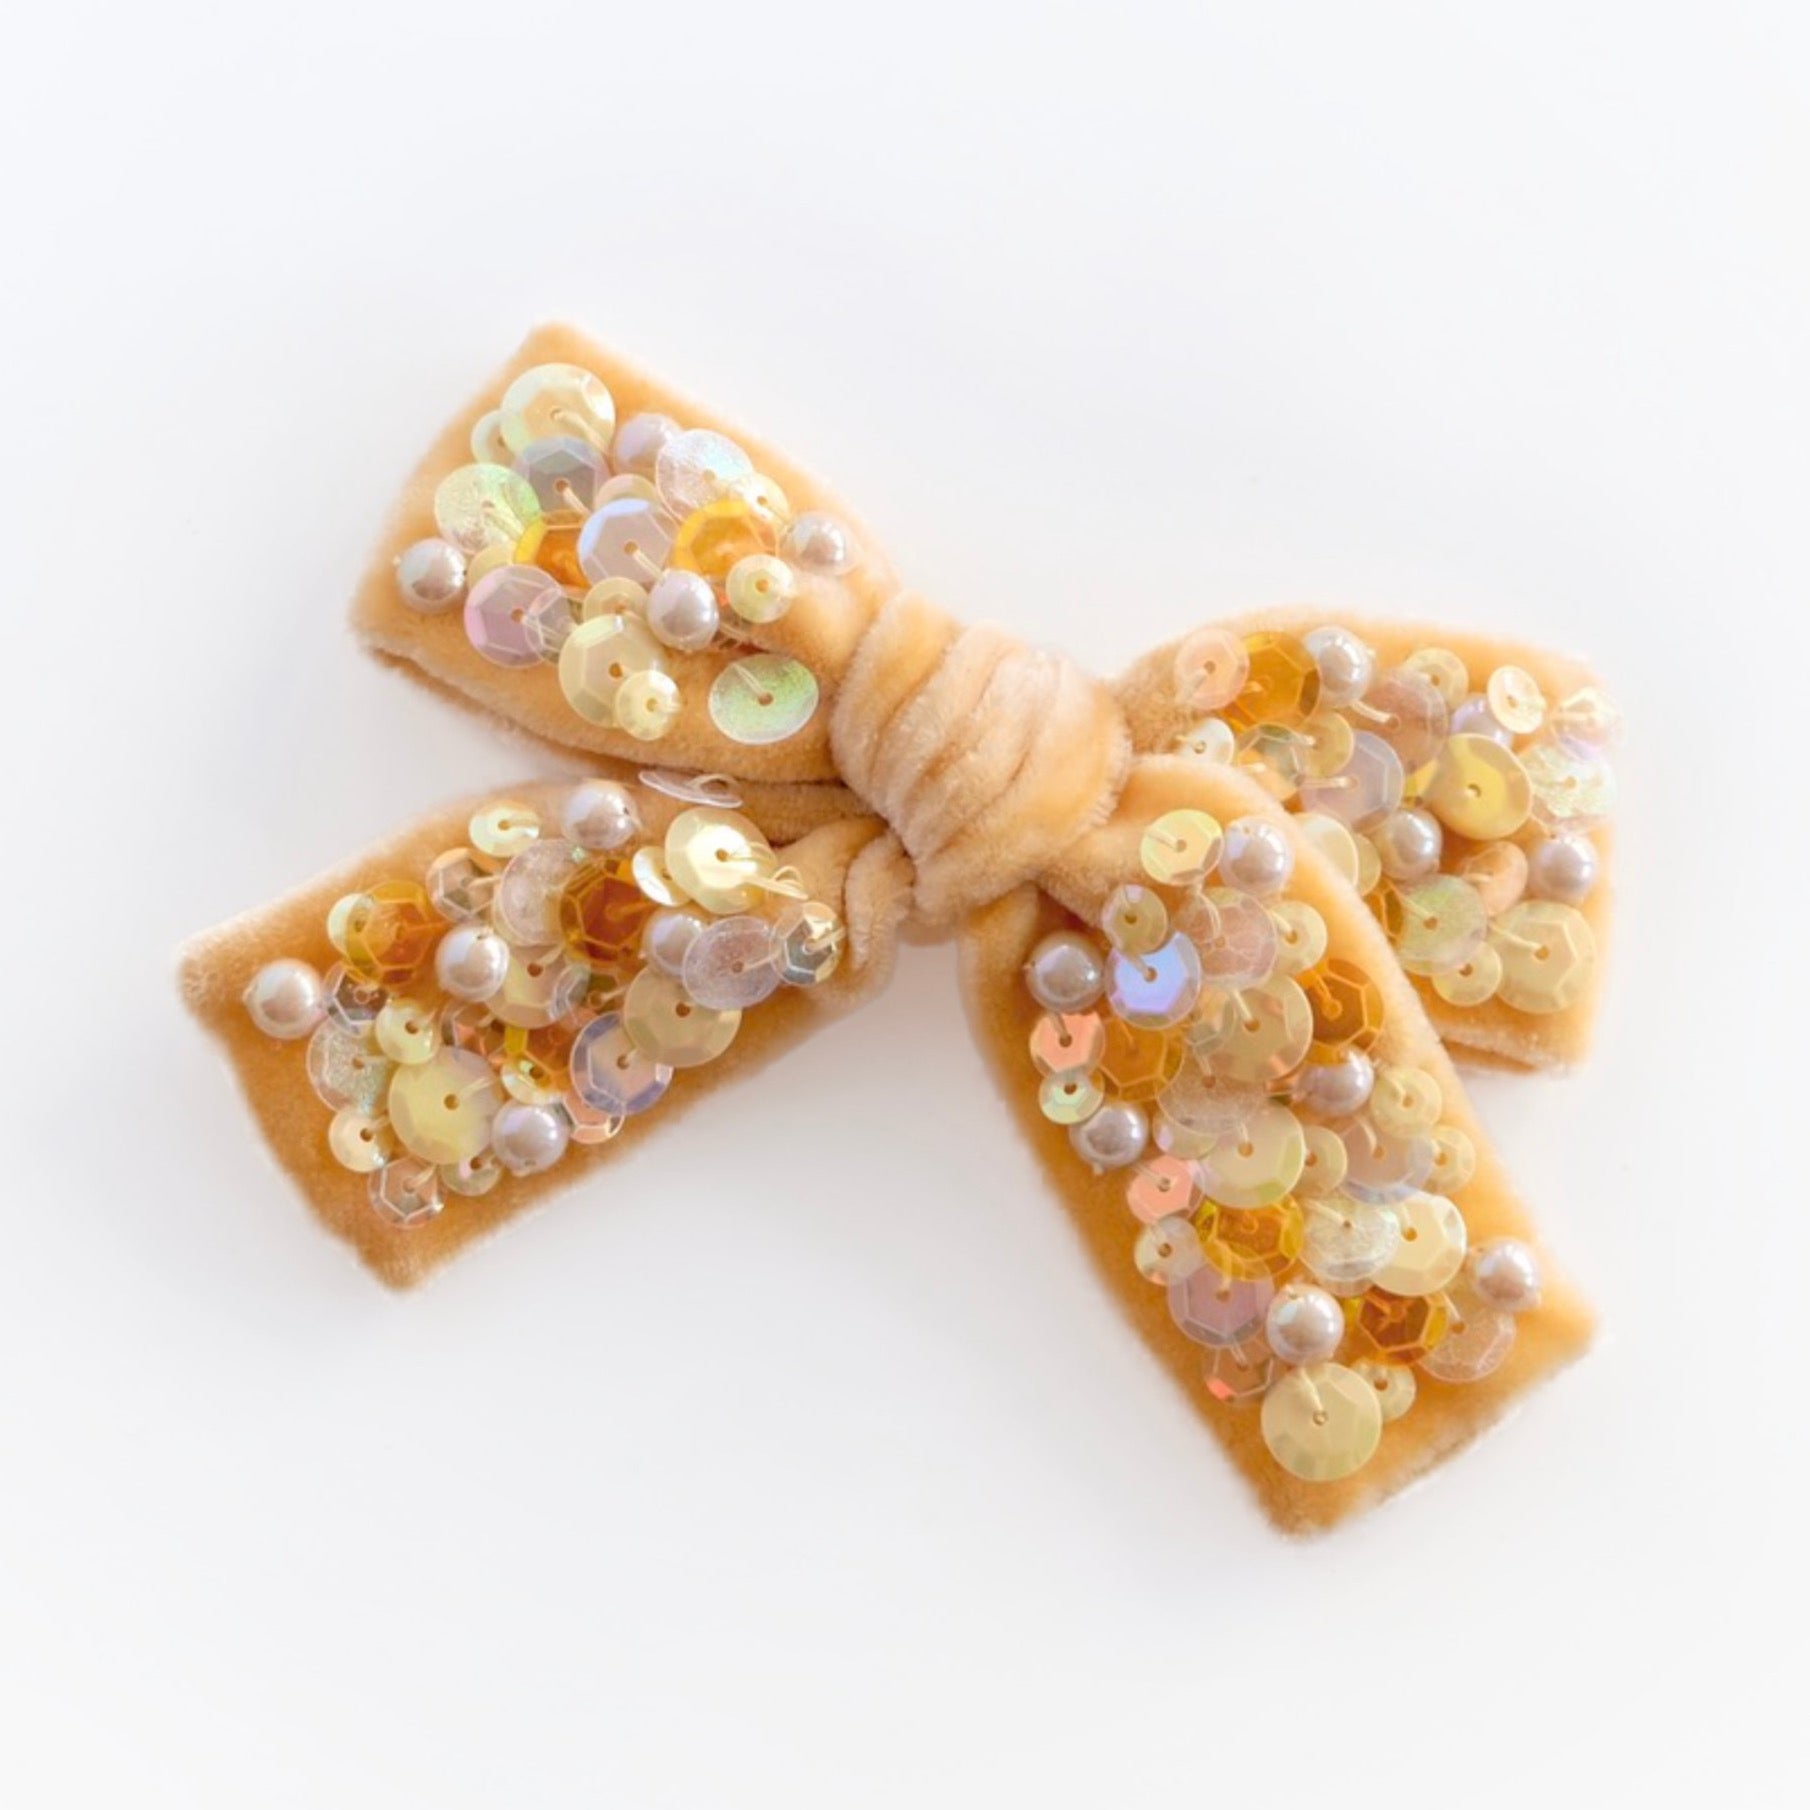 Velvet hair bow embellished with sequins and pearl beads in yellow color tones.